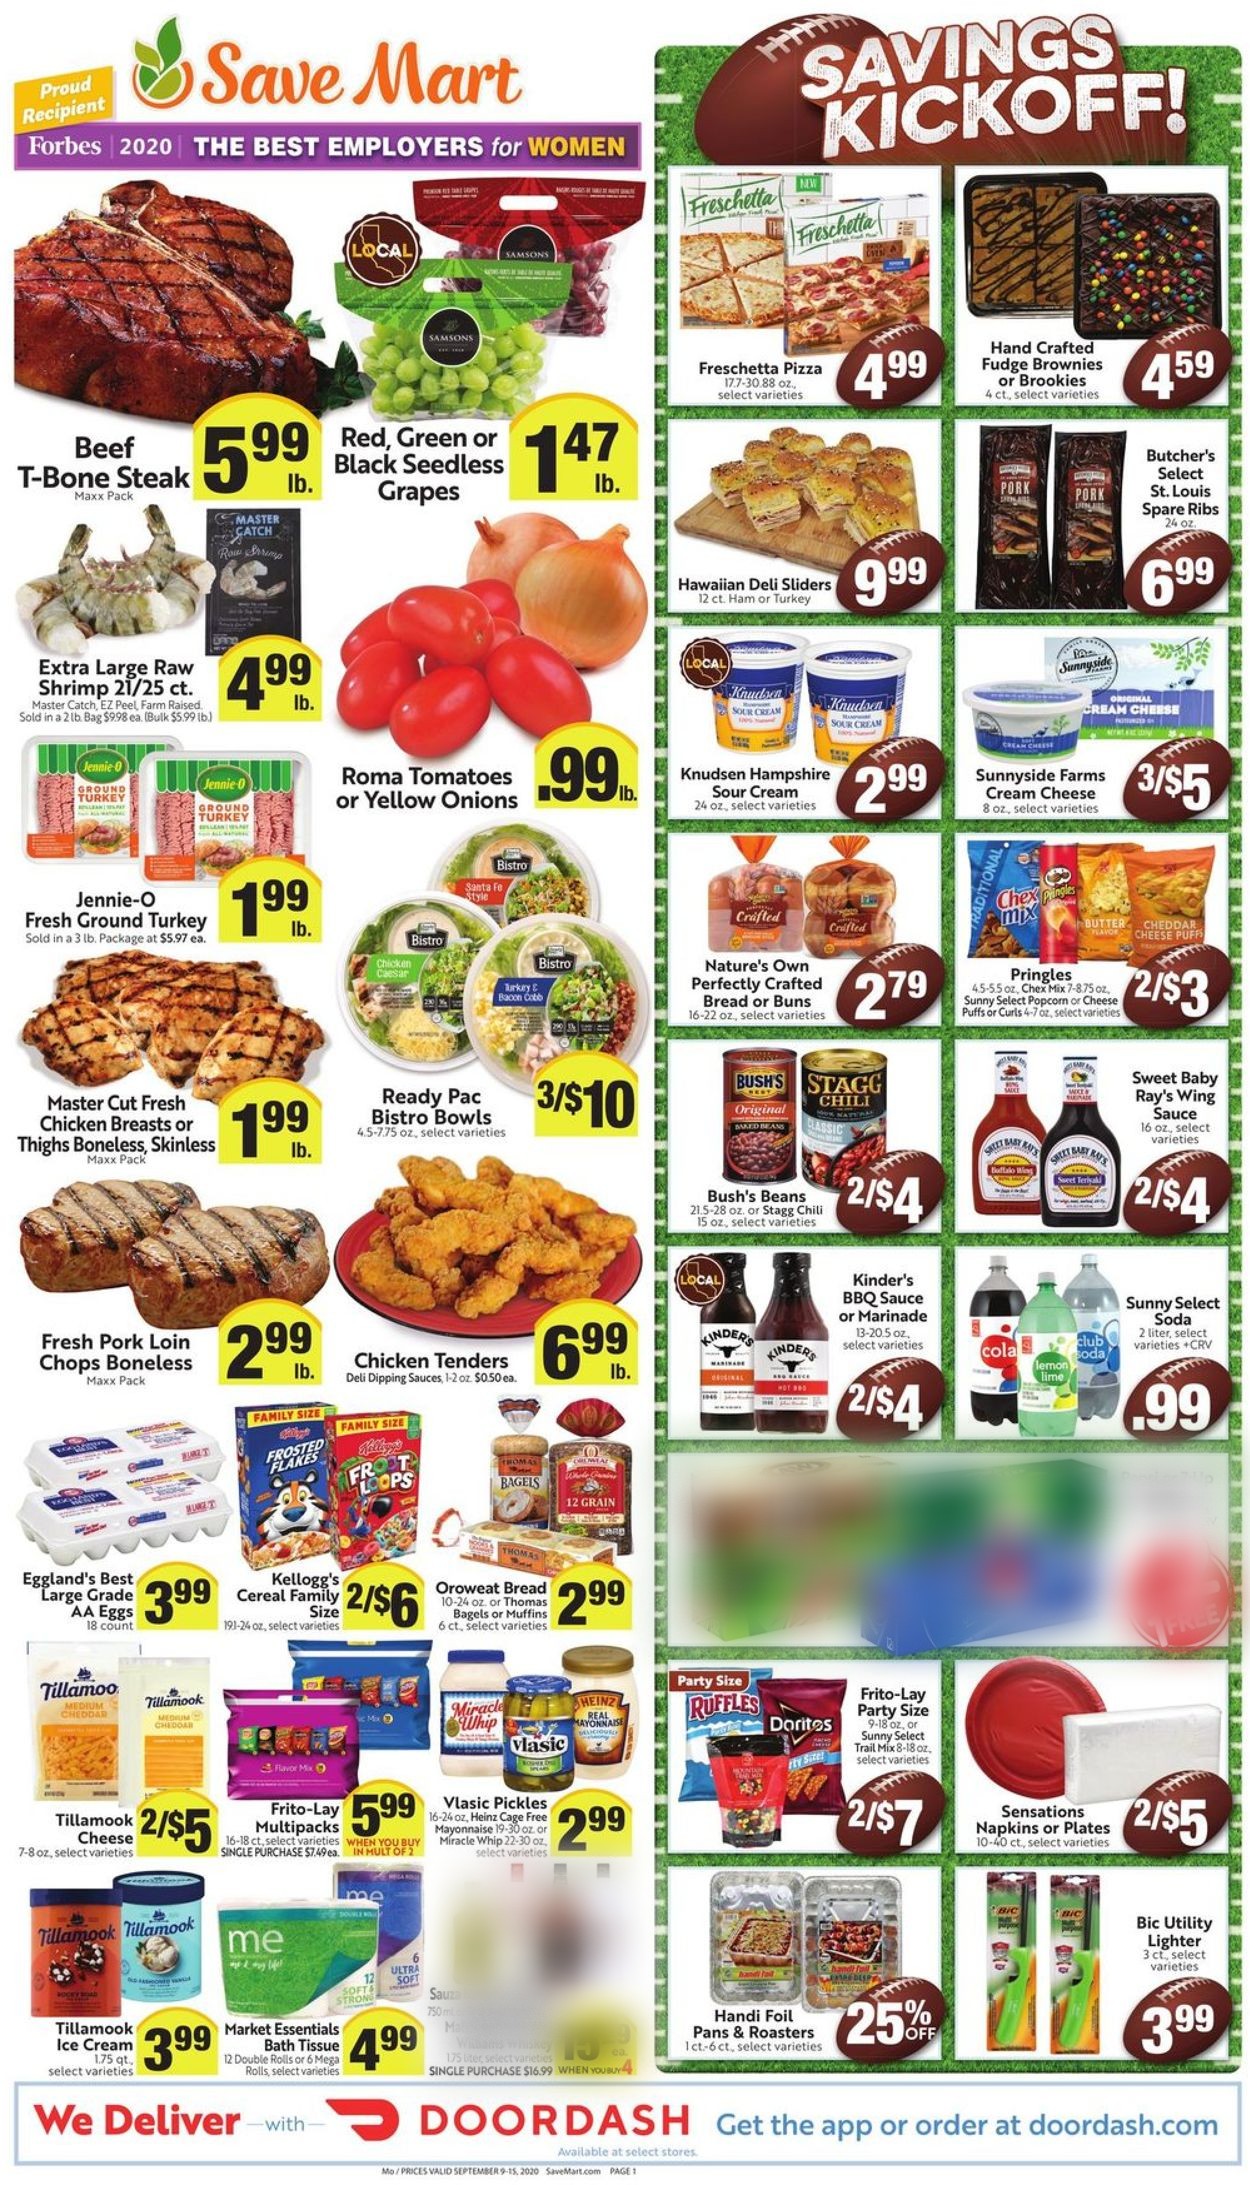 save mart ad for this week